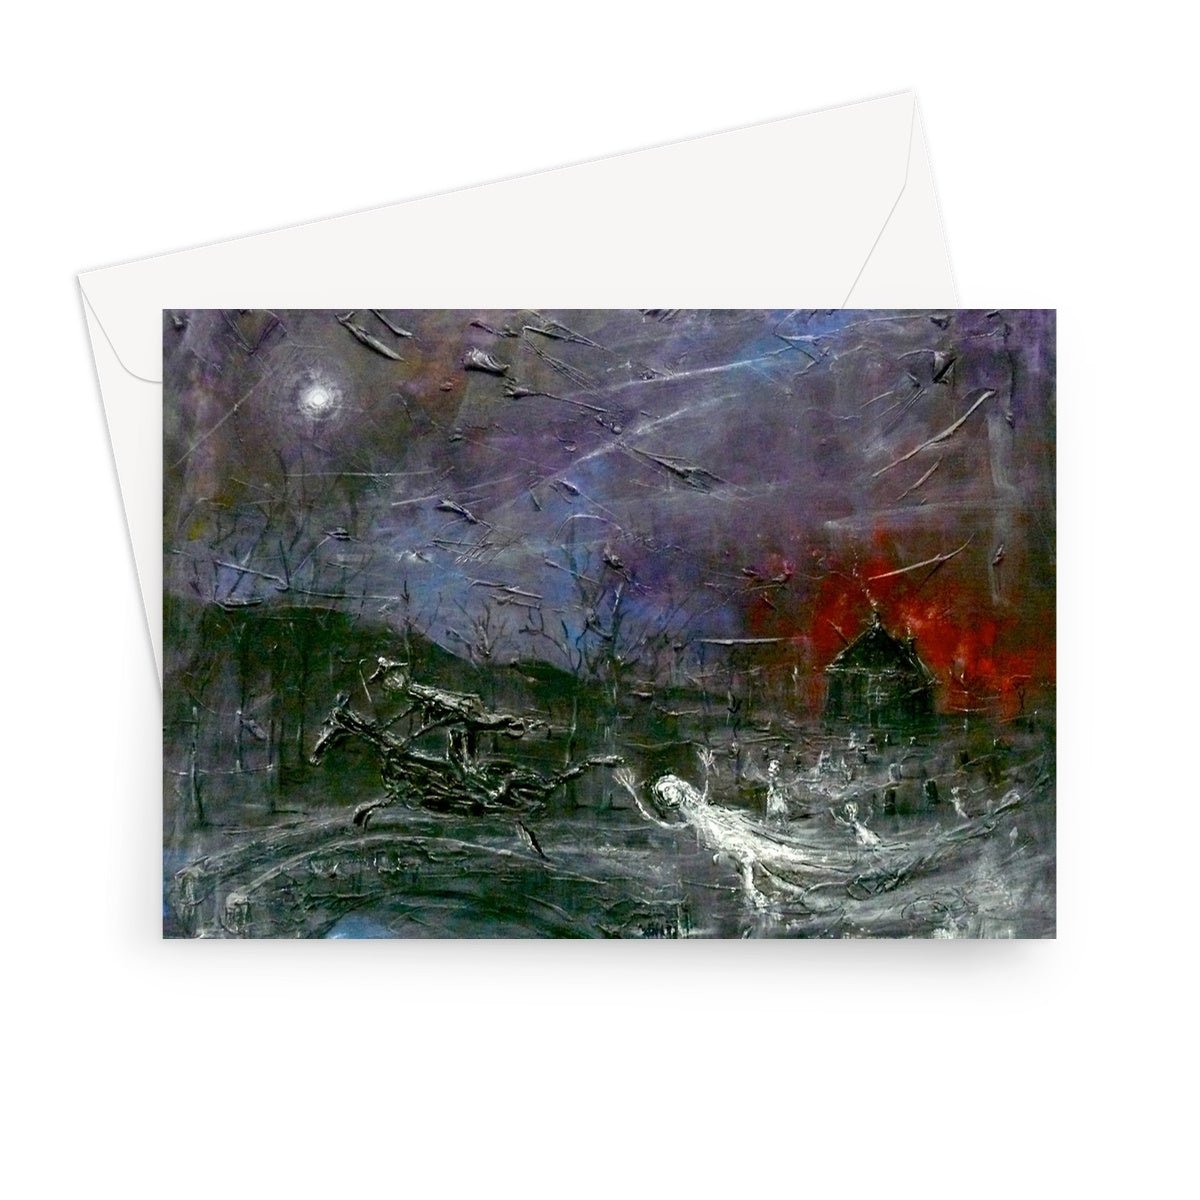 Tam O Shanter Art Gifts Greeting Card-Greetings Cards-Abstract & Impressionistic Art Gallery-7"x5"-1 Card-Paintings, Prints, Homeware, Art Gifts From Scotland By Scottish Artist Kevin Hunter